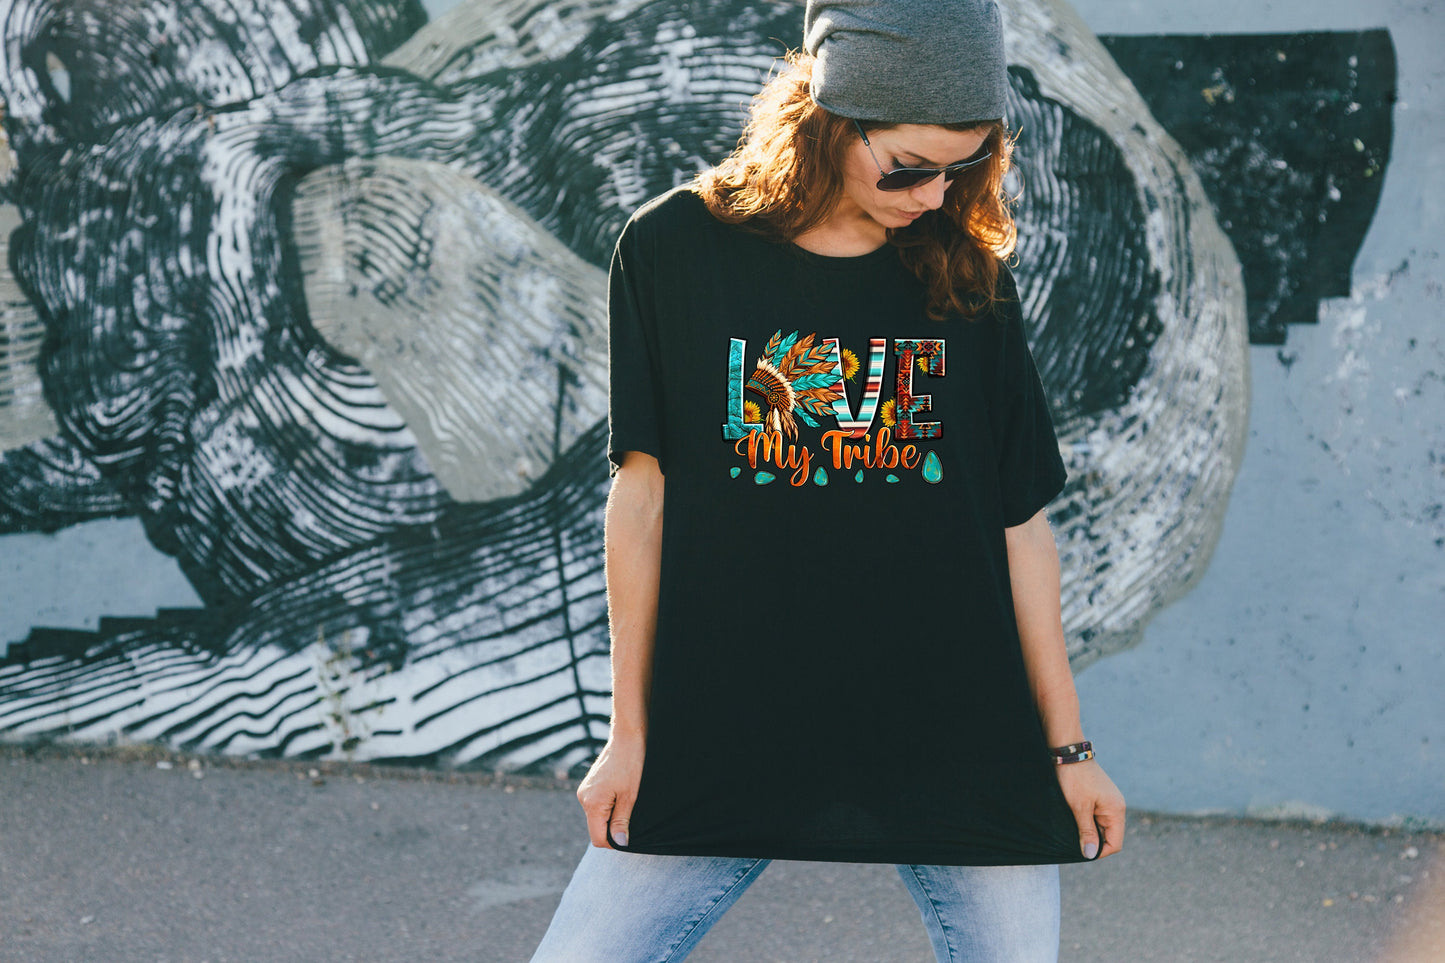 Love My Tribe, Tshirt, Western, Headress, Graphic T's  100% Cotton Black White or Gray